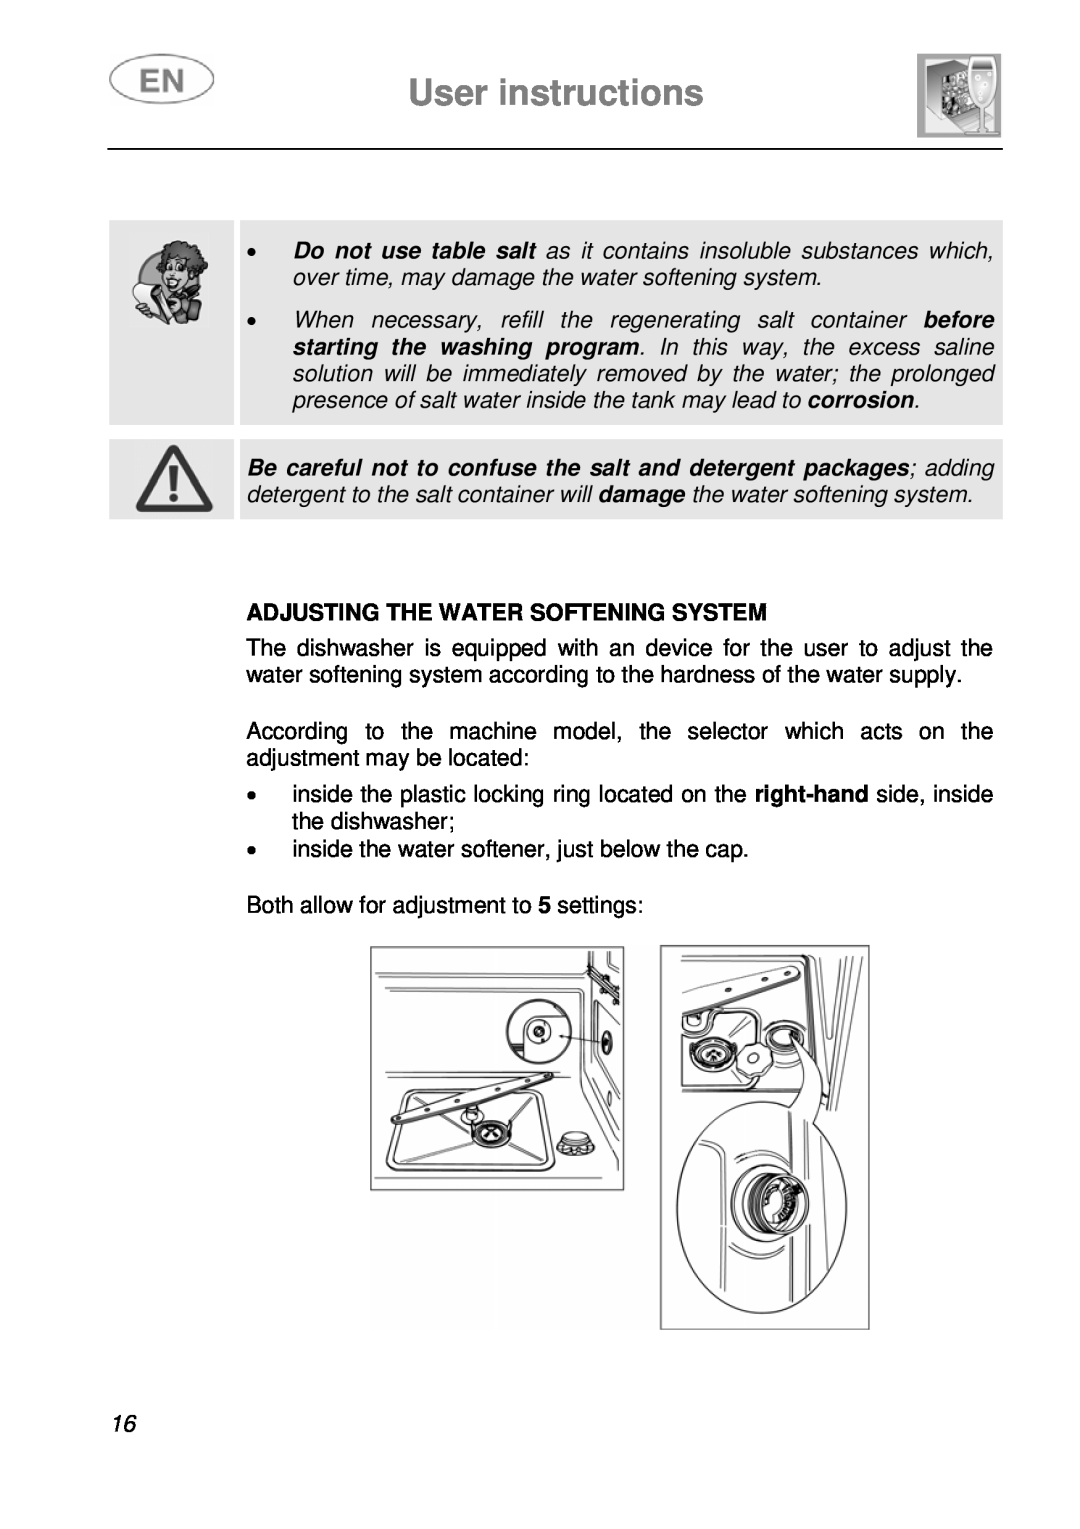 Smeg STA6249, STA6248 instruction manual User instructions, Adjusting The Water Softening System 